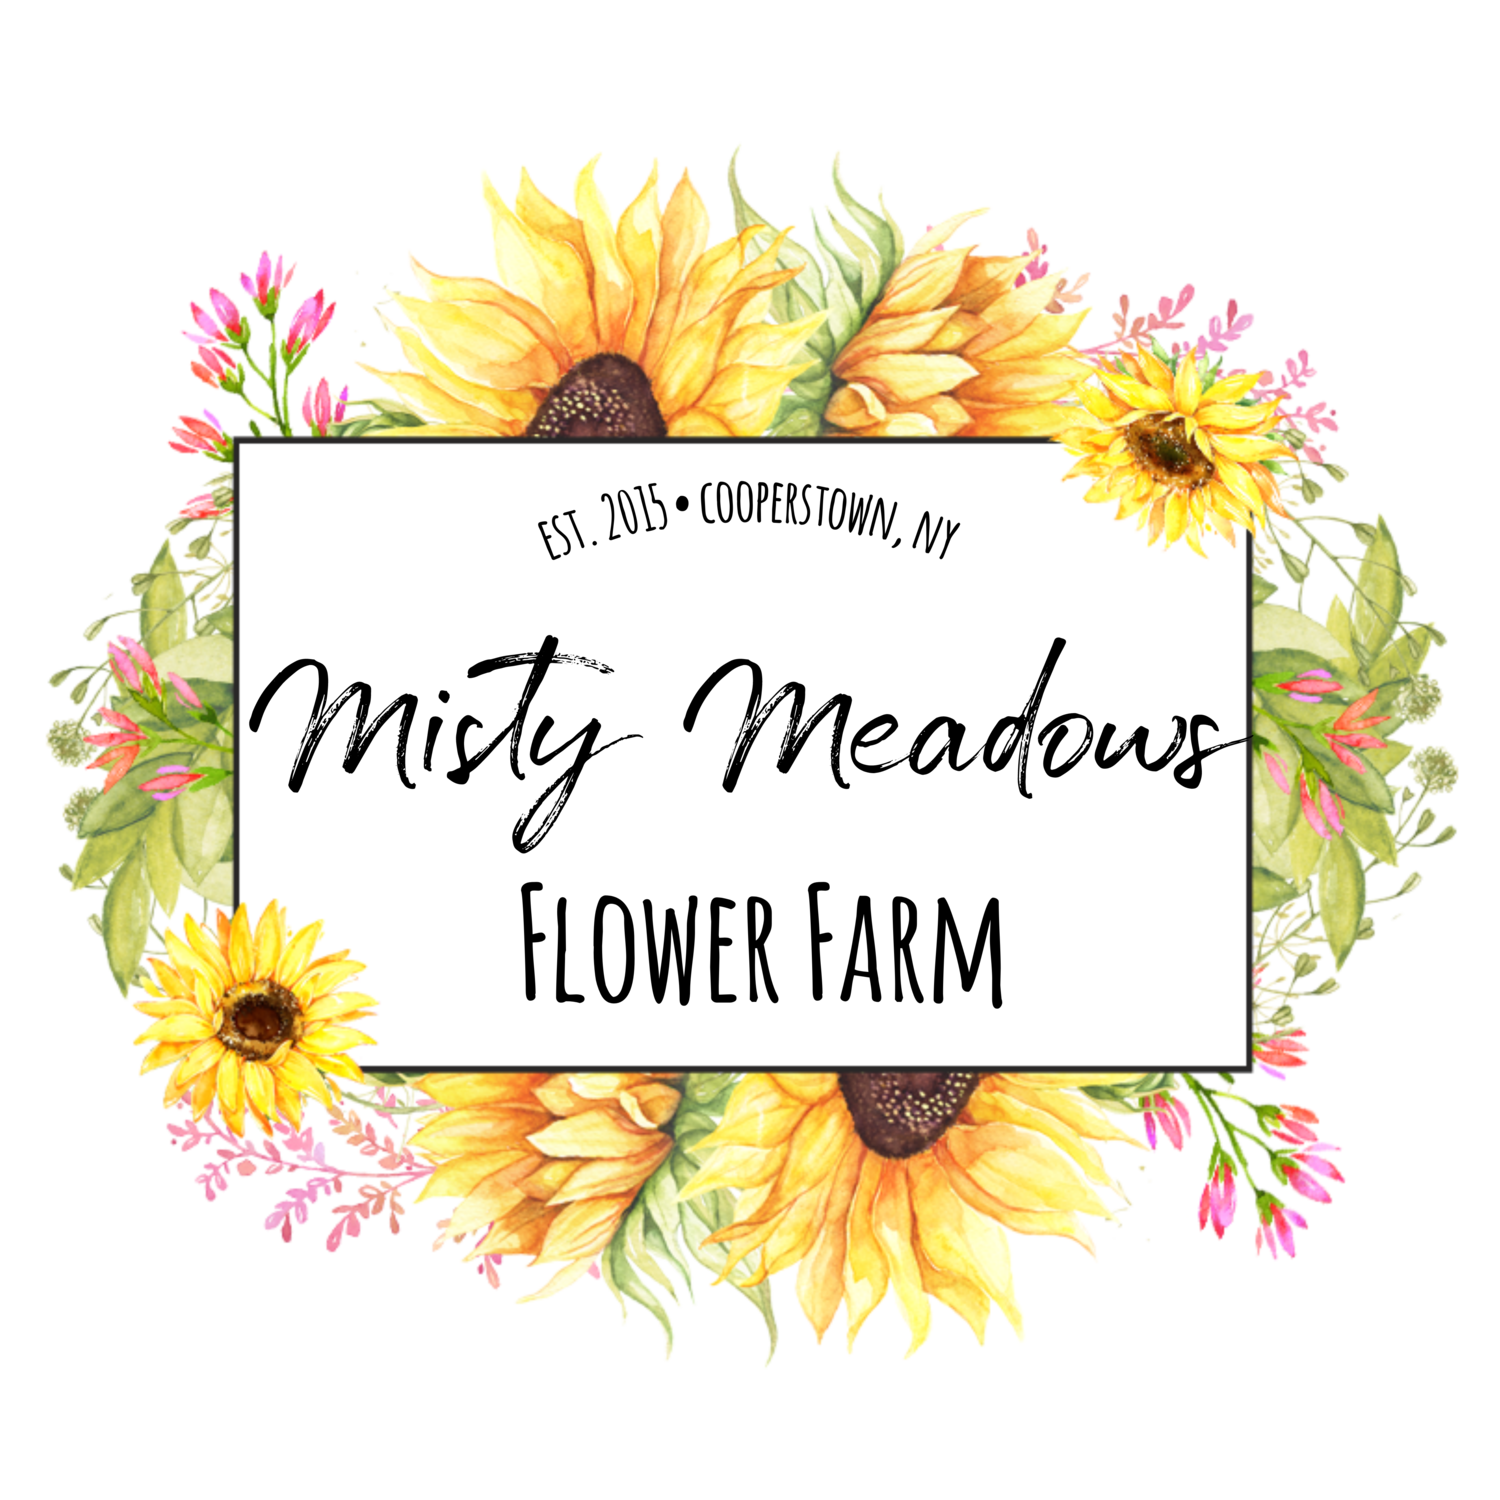 Misty Meadows Flower Farm | Local Flowers | Floral Arrangements in Oneonta &amp; Cooperstown areas, NY